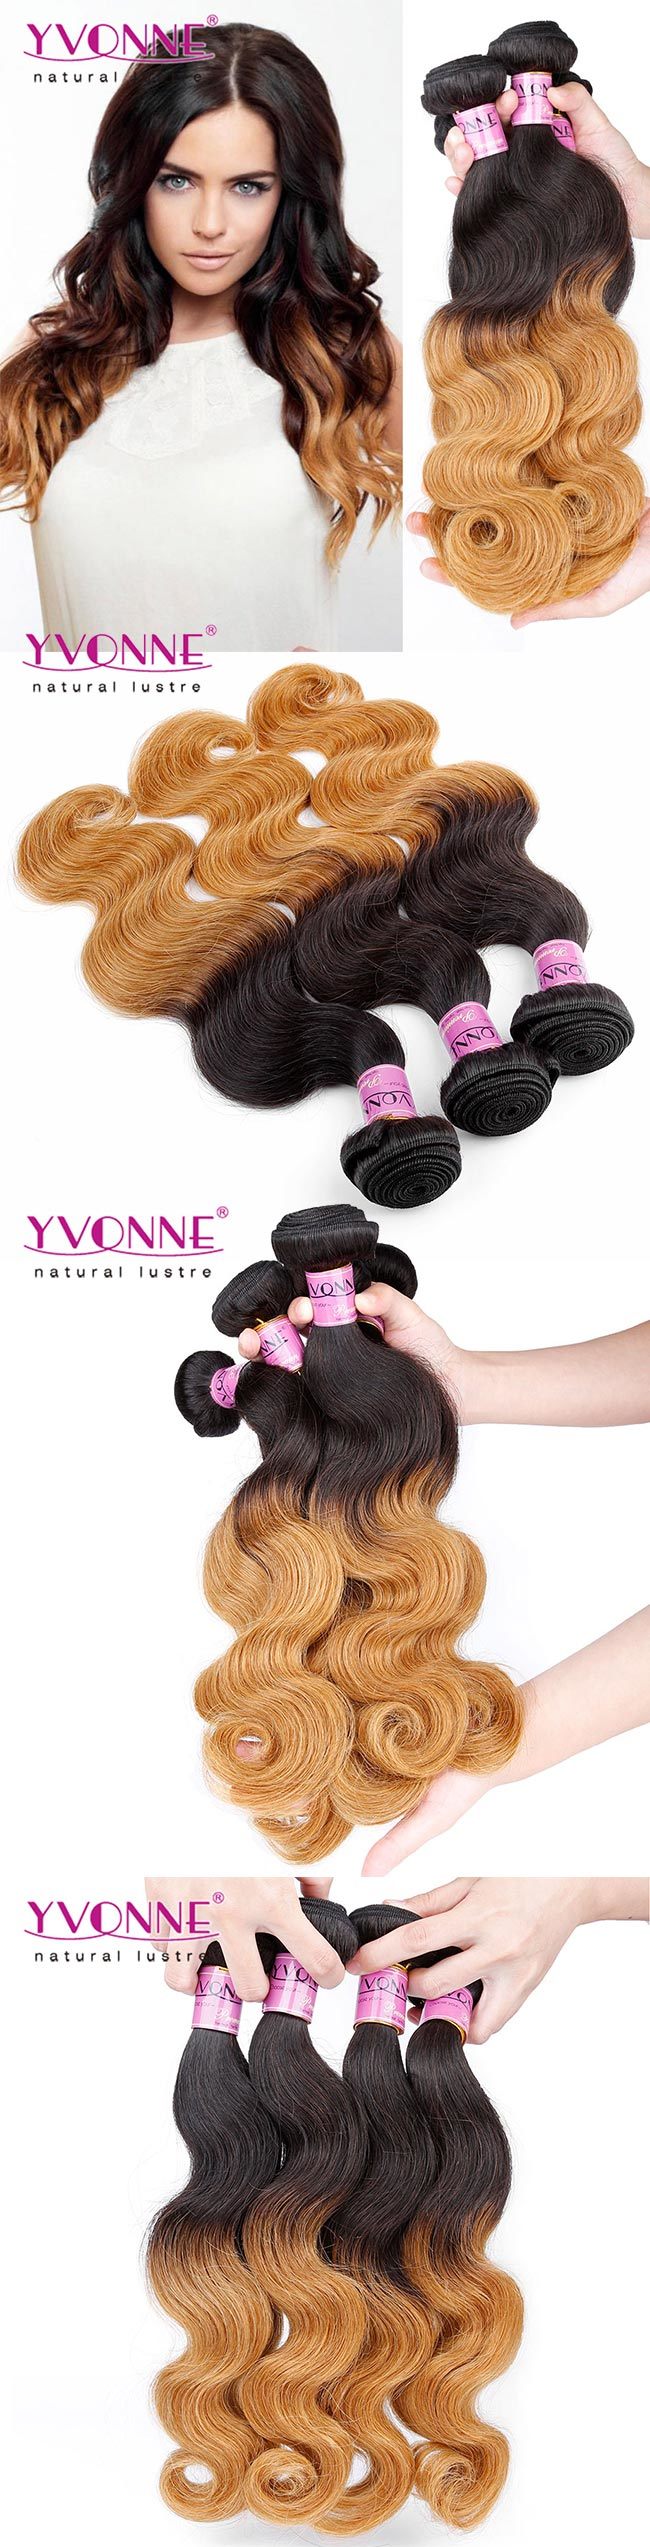 Yvonne Fashion Peruvian Ombre Color Body Wavy Hair Weave